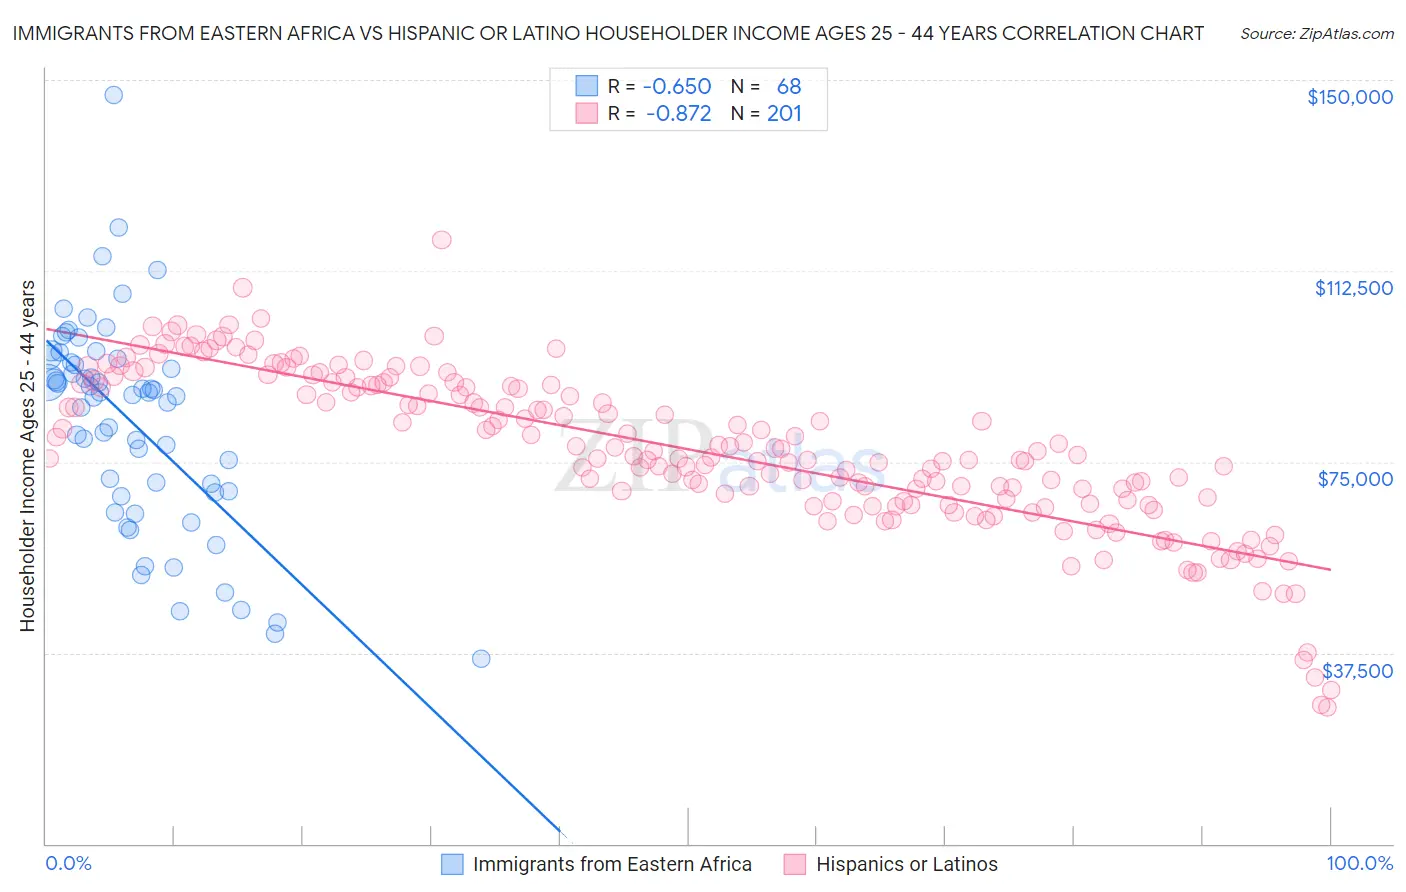 Immigrants from Eastern Africa vs Hispanic or Latino Householder Income Ages 25 - 44 years